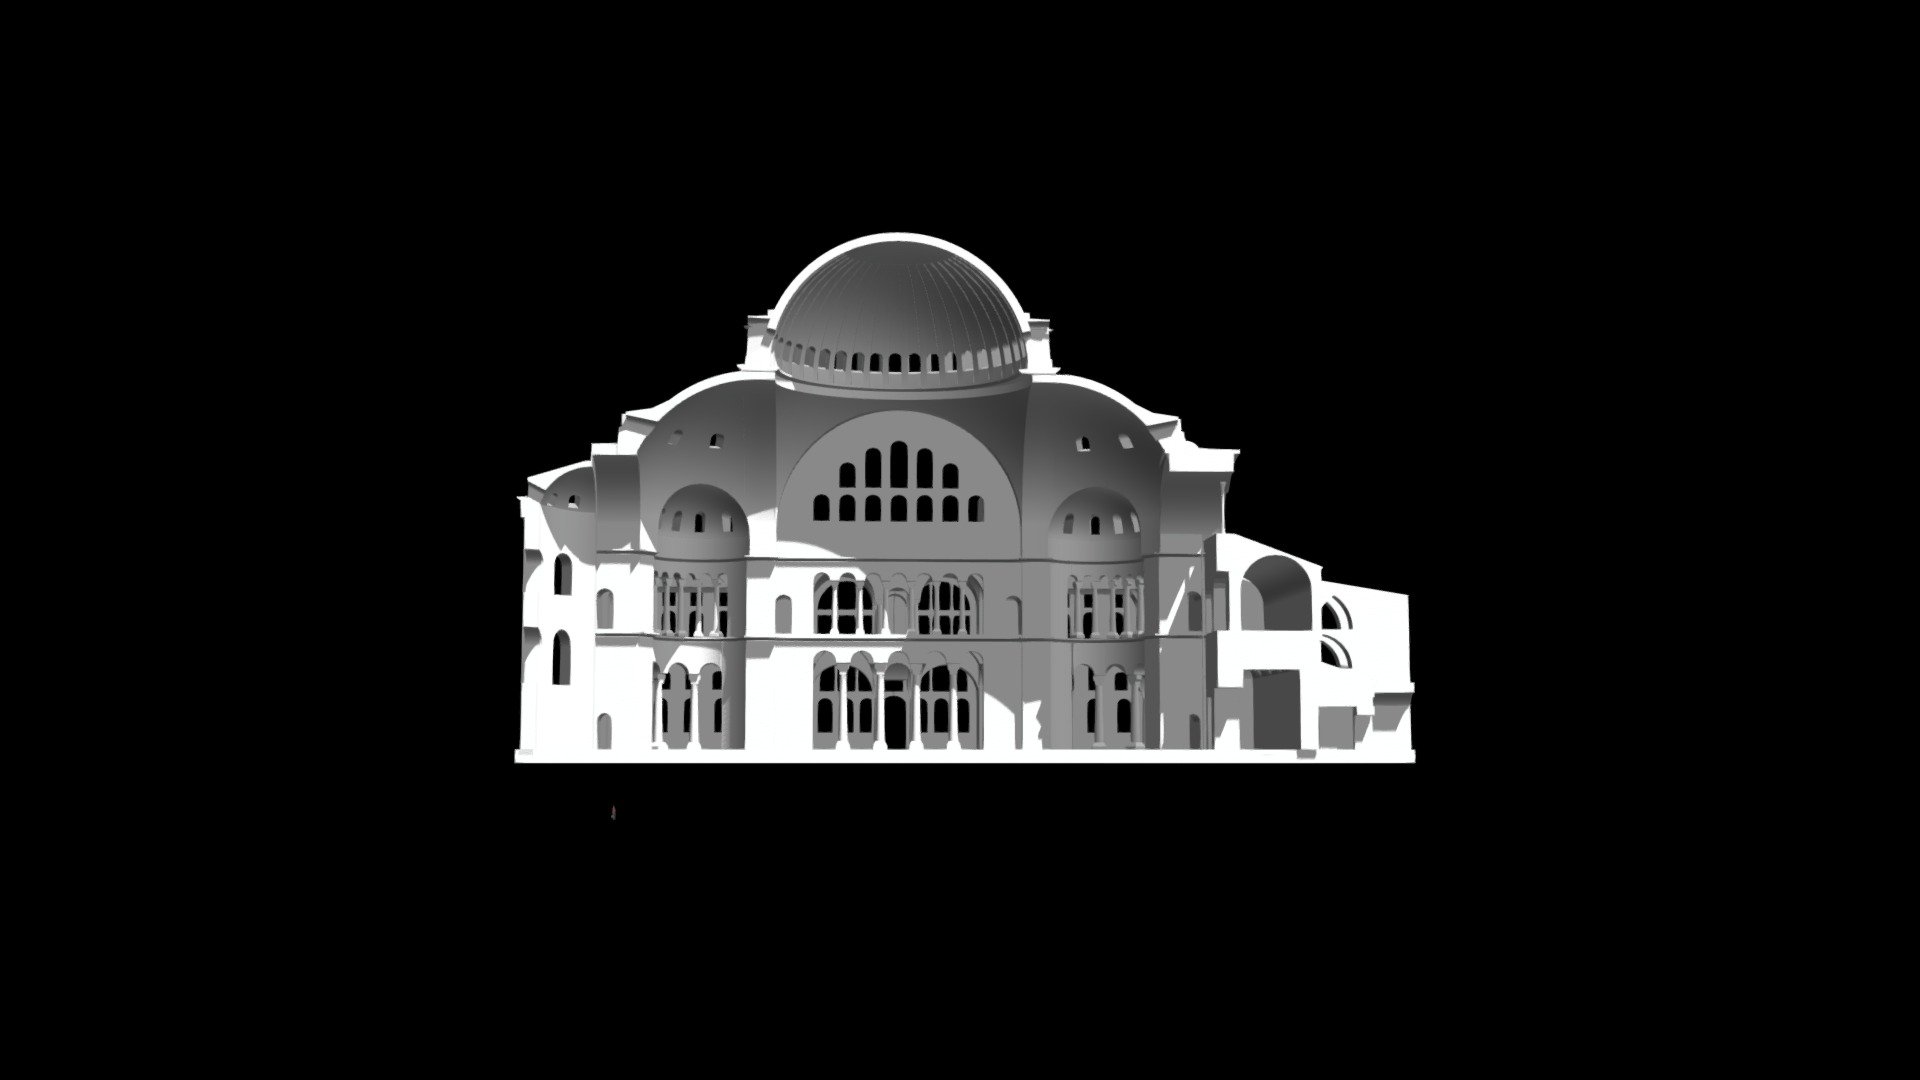 A cross section of the main building composing Hagia Sophia (Church, Nartex, Esonartex), in its byzantine stage - Hagia Sophia Section - 3D model by albertghezzi44 3d model